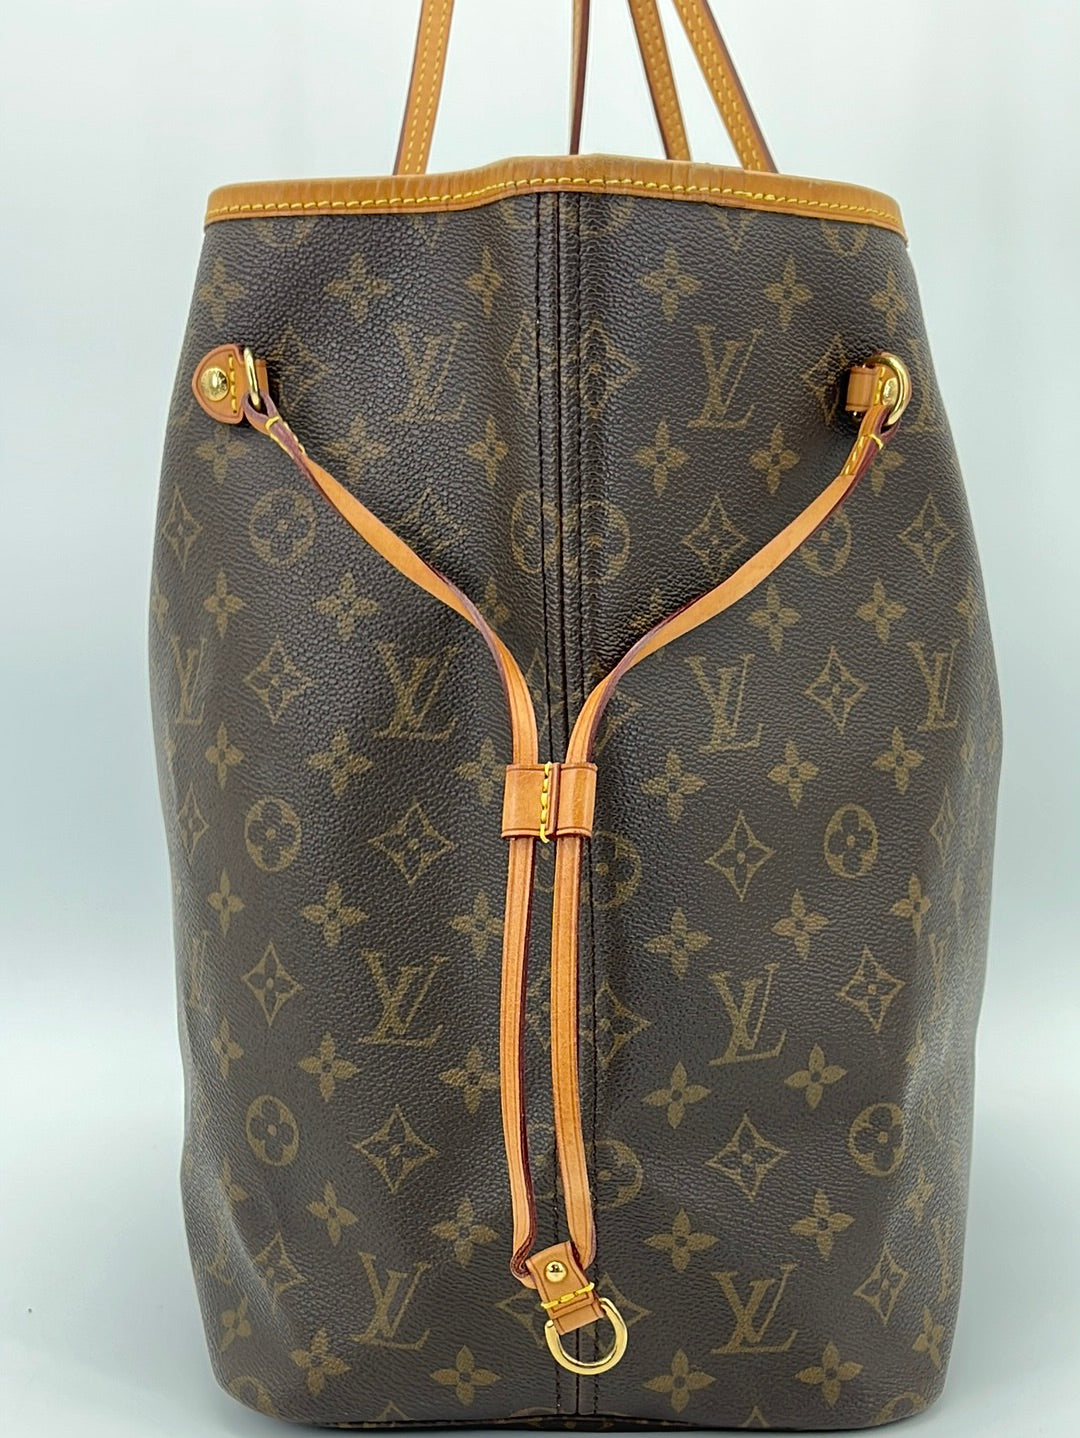 PRELOVED Louis Vuitton Monogram Canvas Neverfull GM Tote Bag